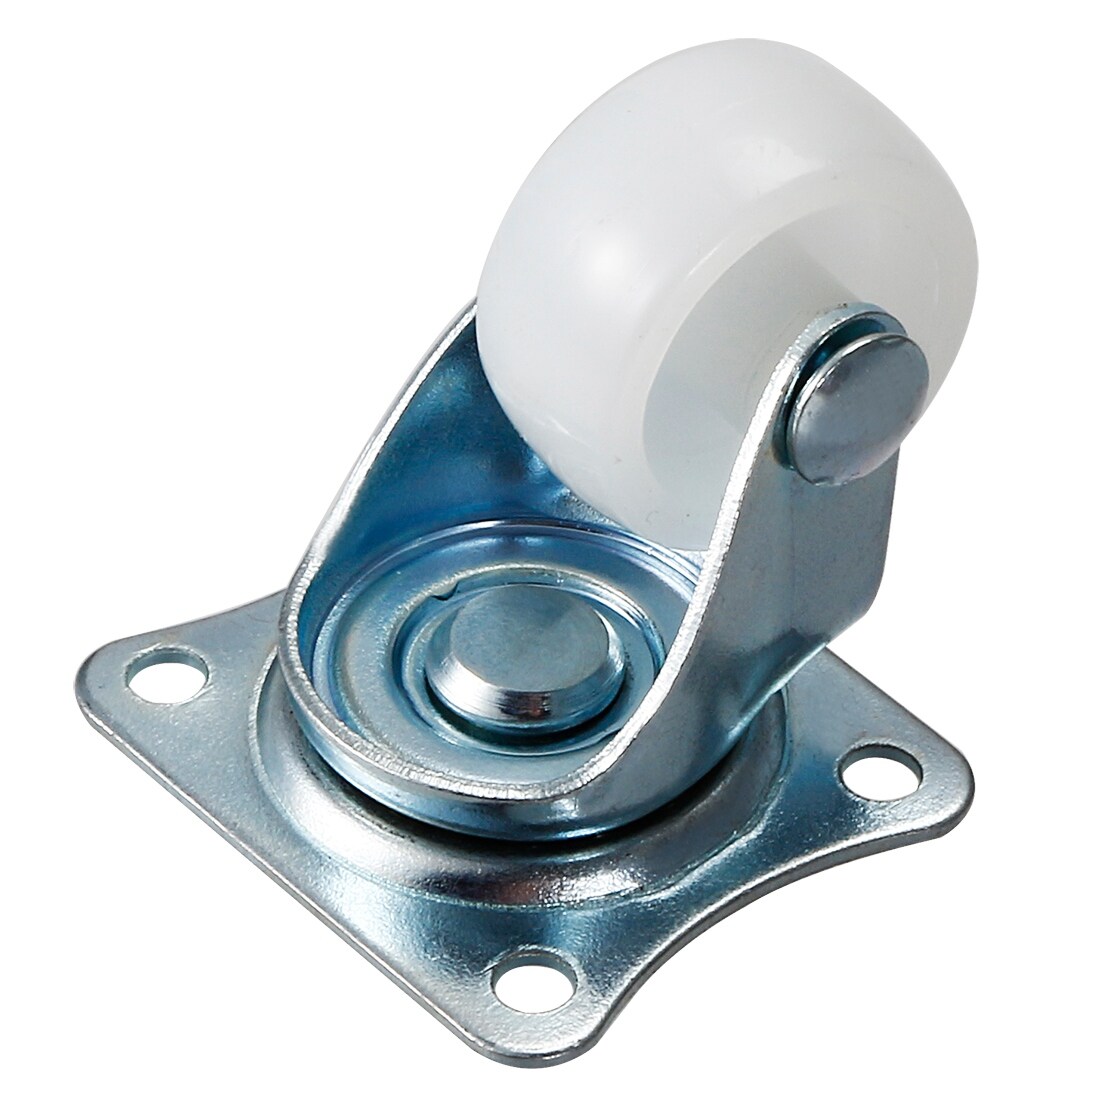 Swivel Caster Wheels Polypropylene with 360 Degree Top Plate, 6 Pcs